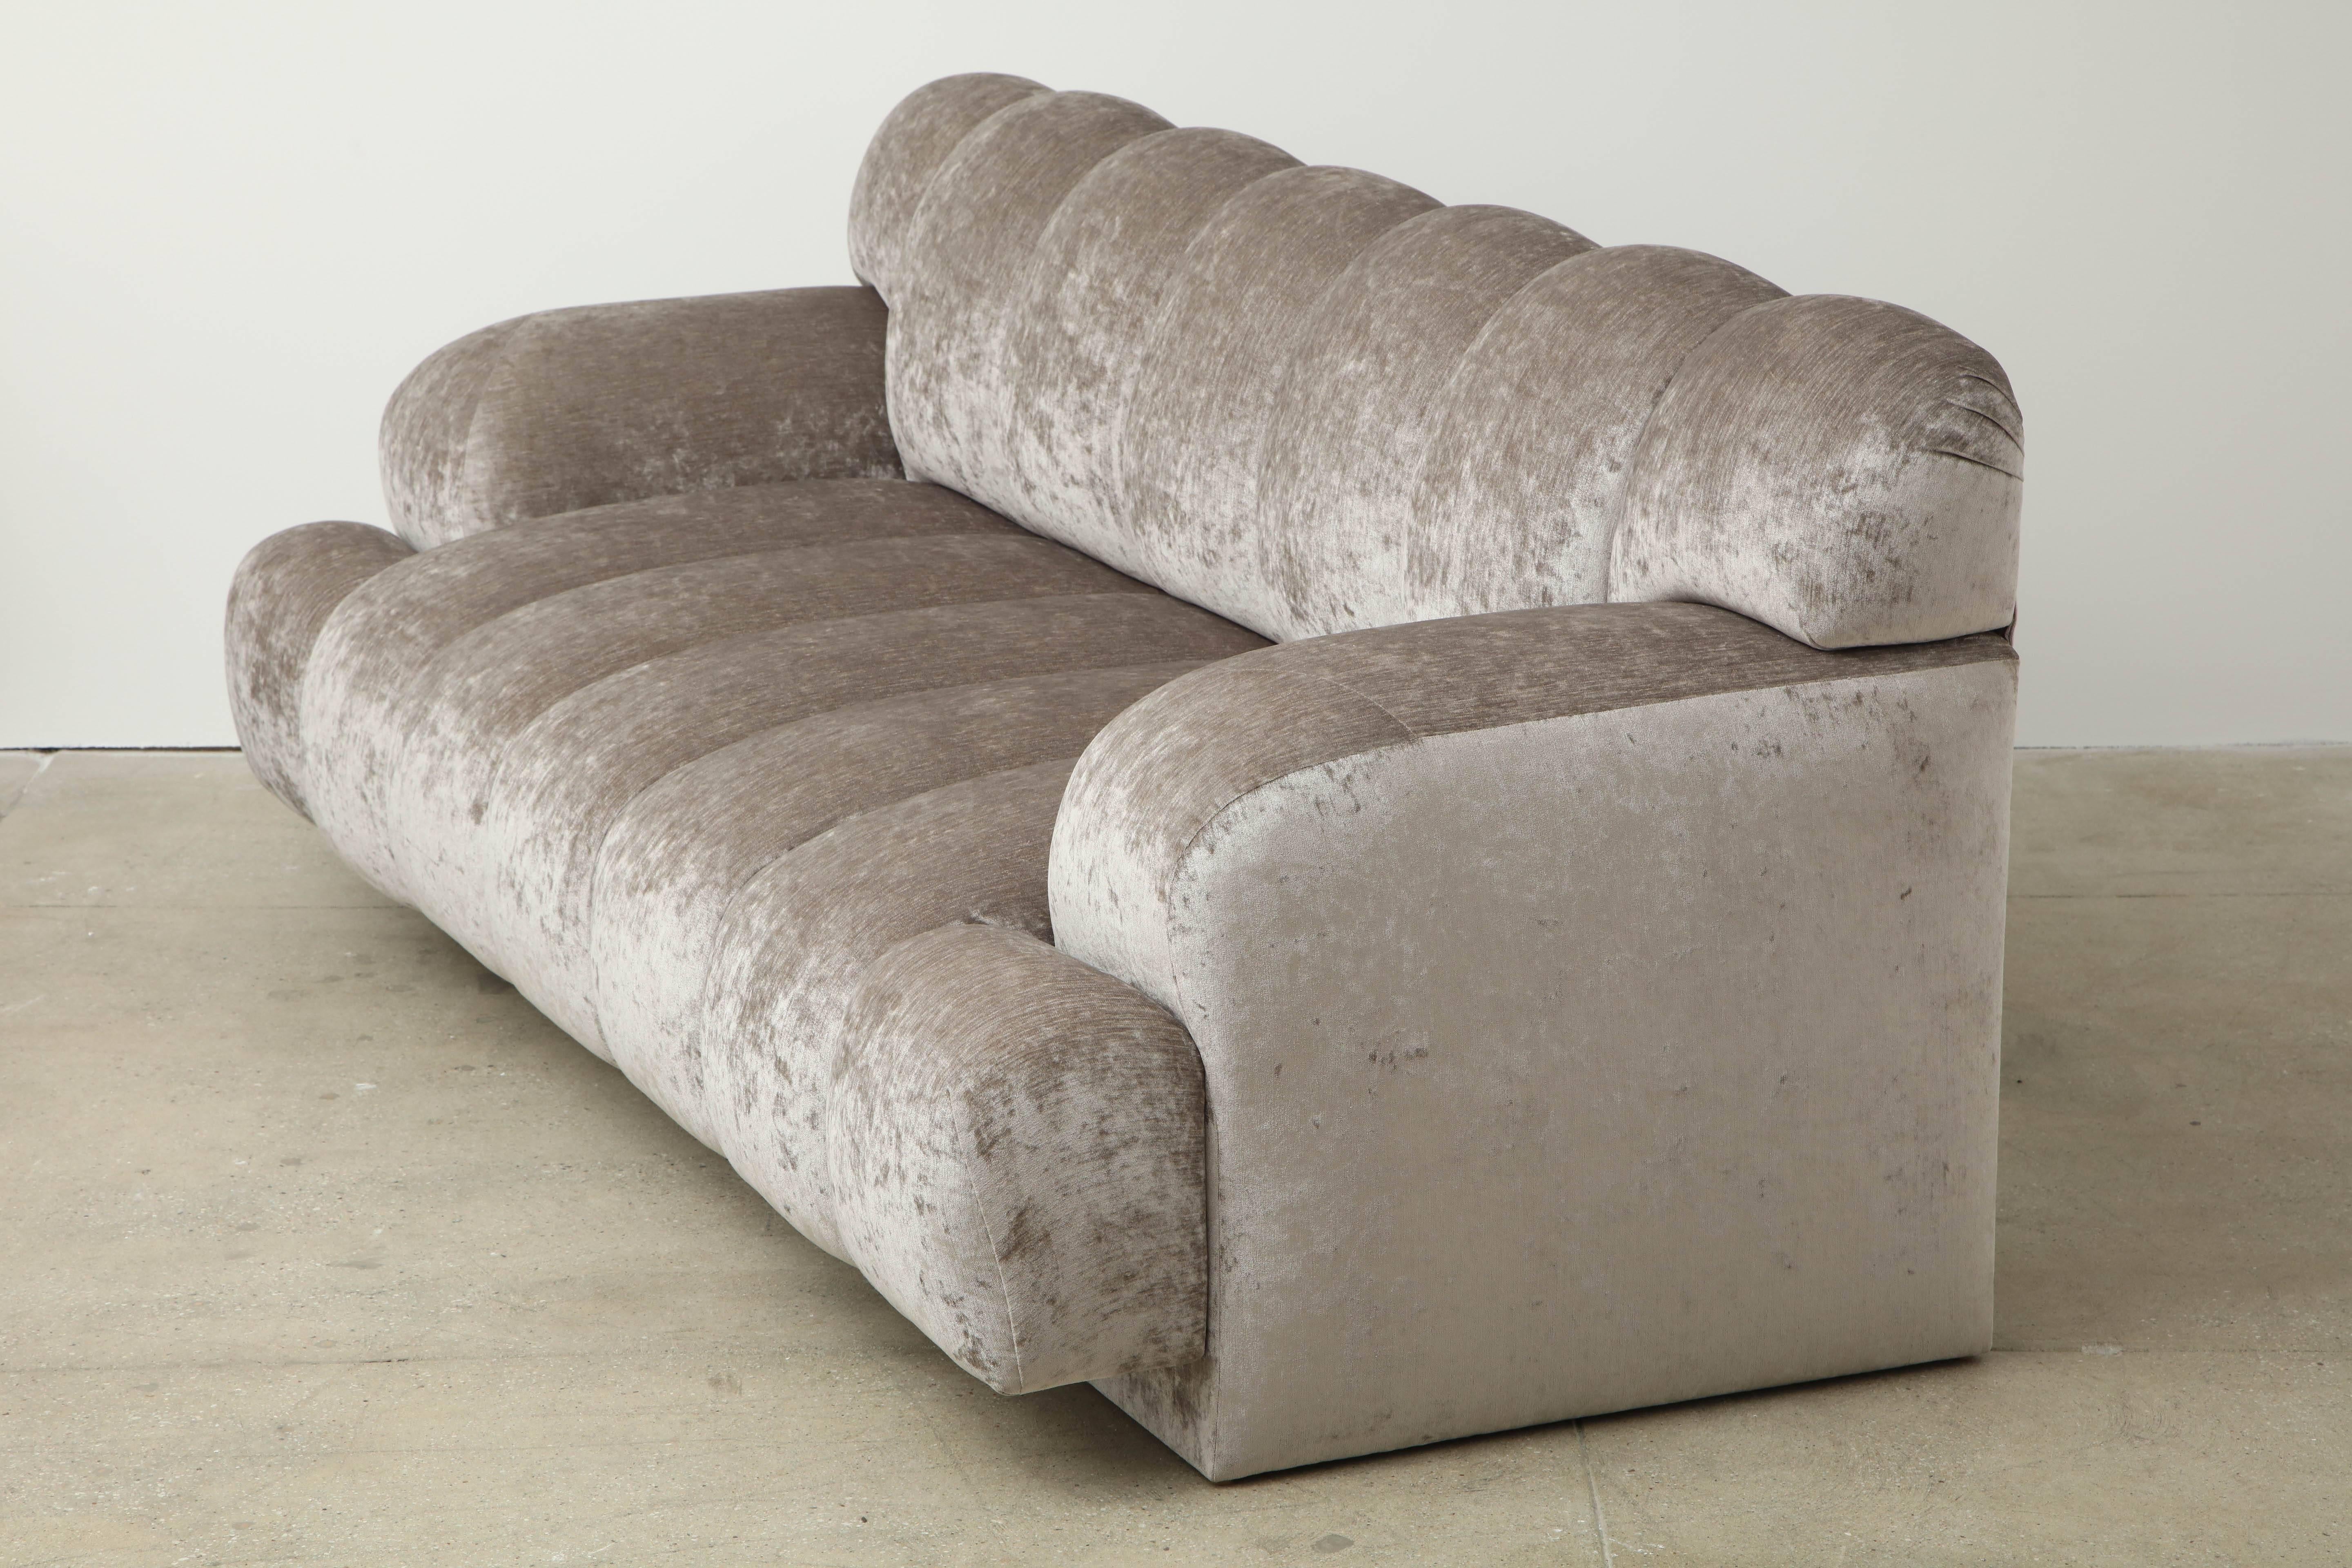 American Glamorous Channel Tufted Sofa by Steve Chase